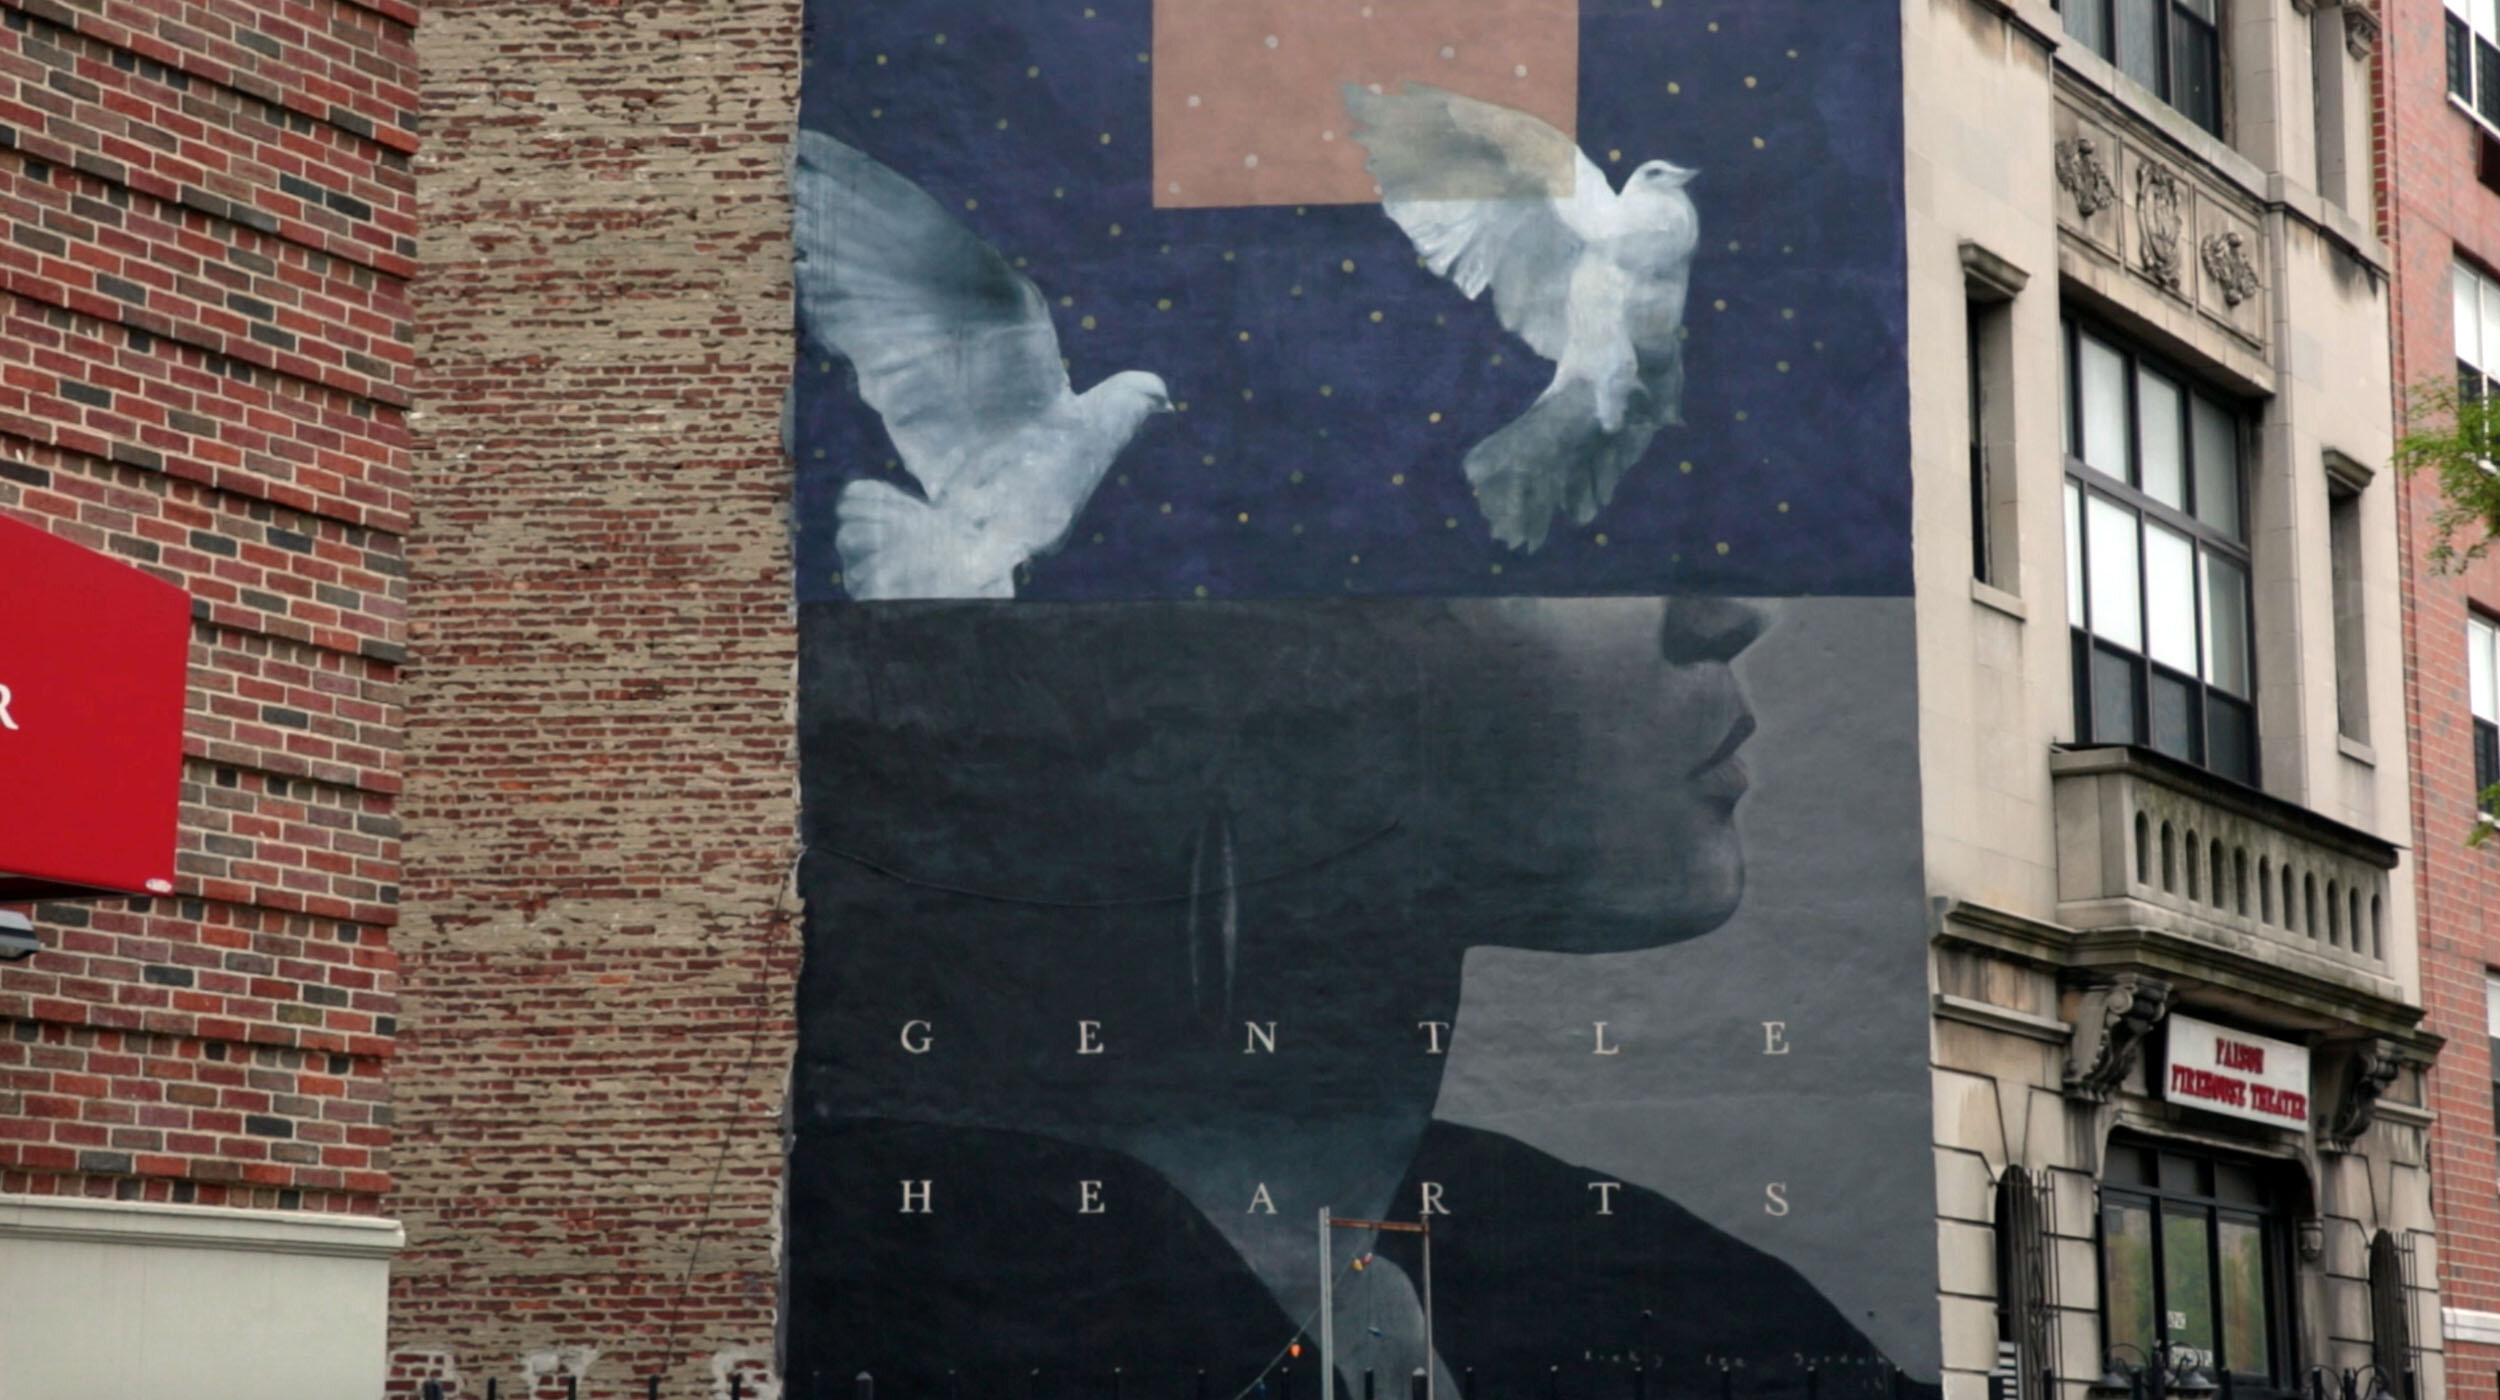 HARLEM, NEW YORK On the Faison Firehouse Theater, South African artist Ricky Lee Gordon, also know as the graffiti savant Freddy Sam, created this second mural in his Gentle Hearts series, about the disappointment of the young in Iran. 